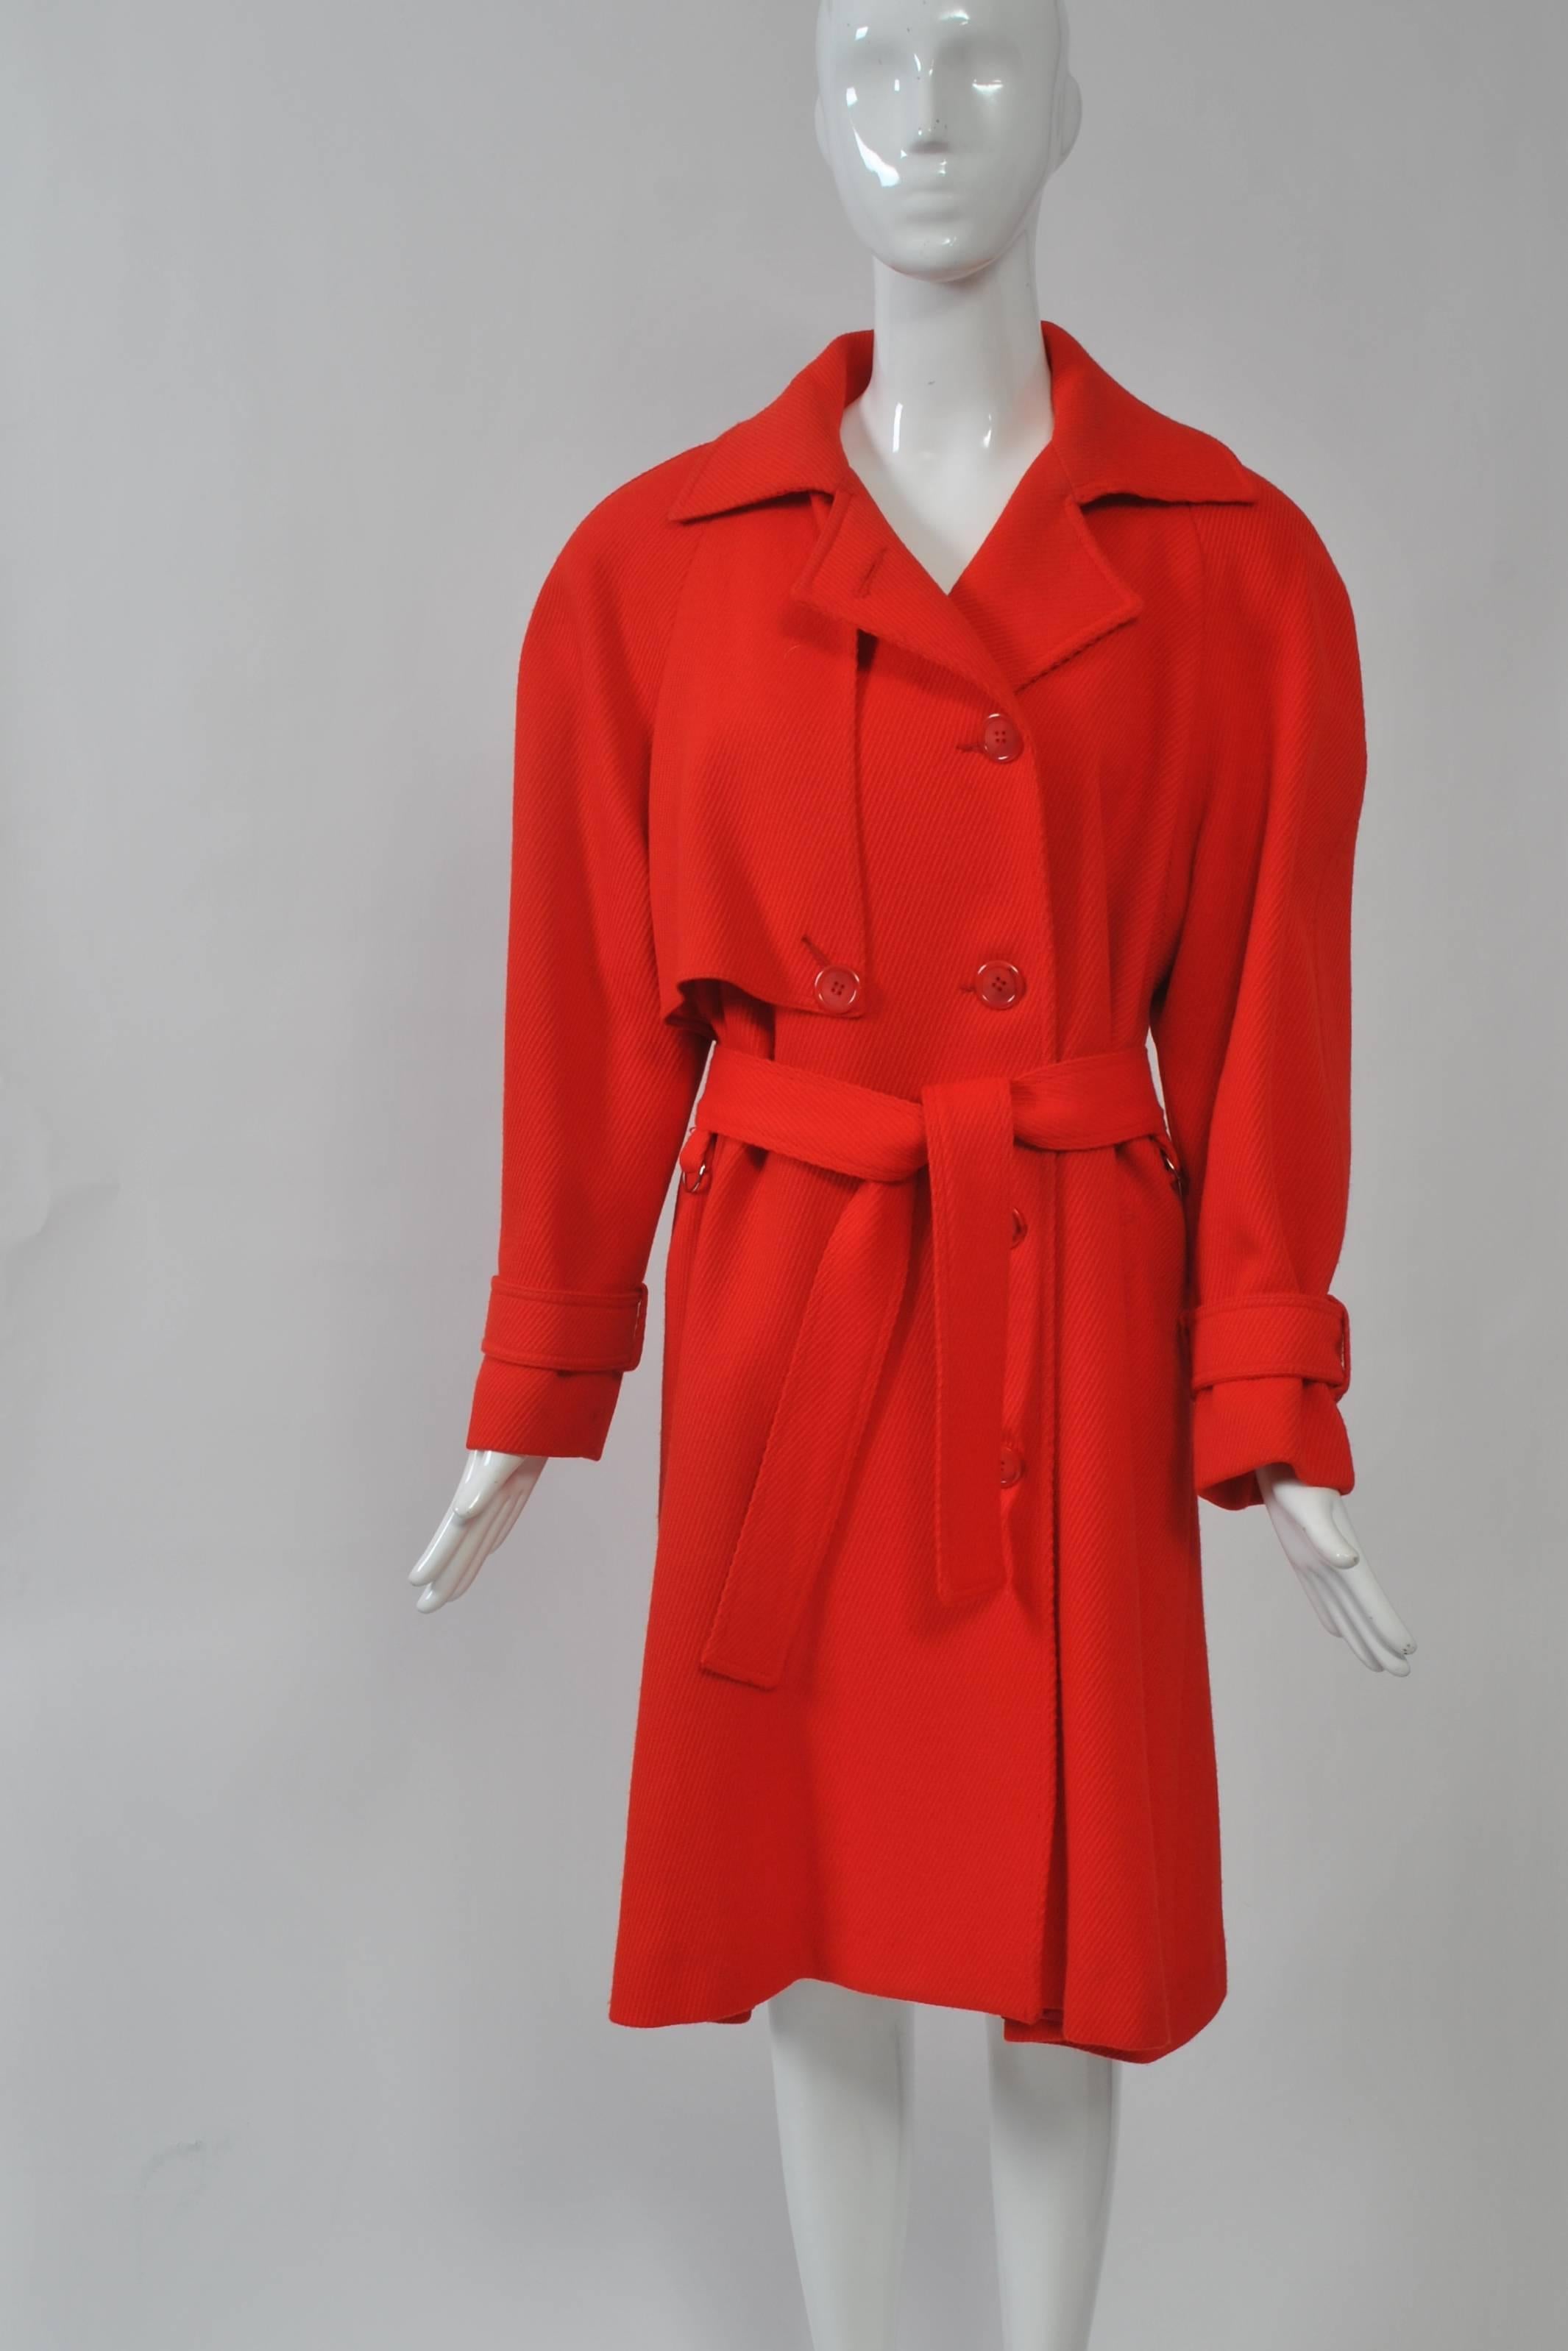 1980s trench coat in red gabardine by Ilie Wacs featuring raglan sleeves, half-capelet, and self belt. Excellent condition.